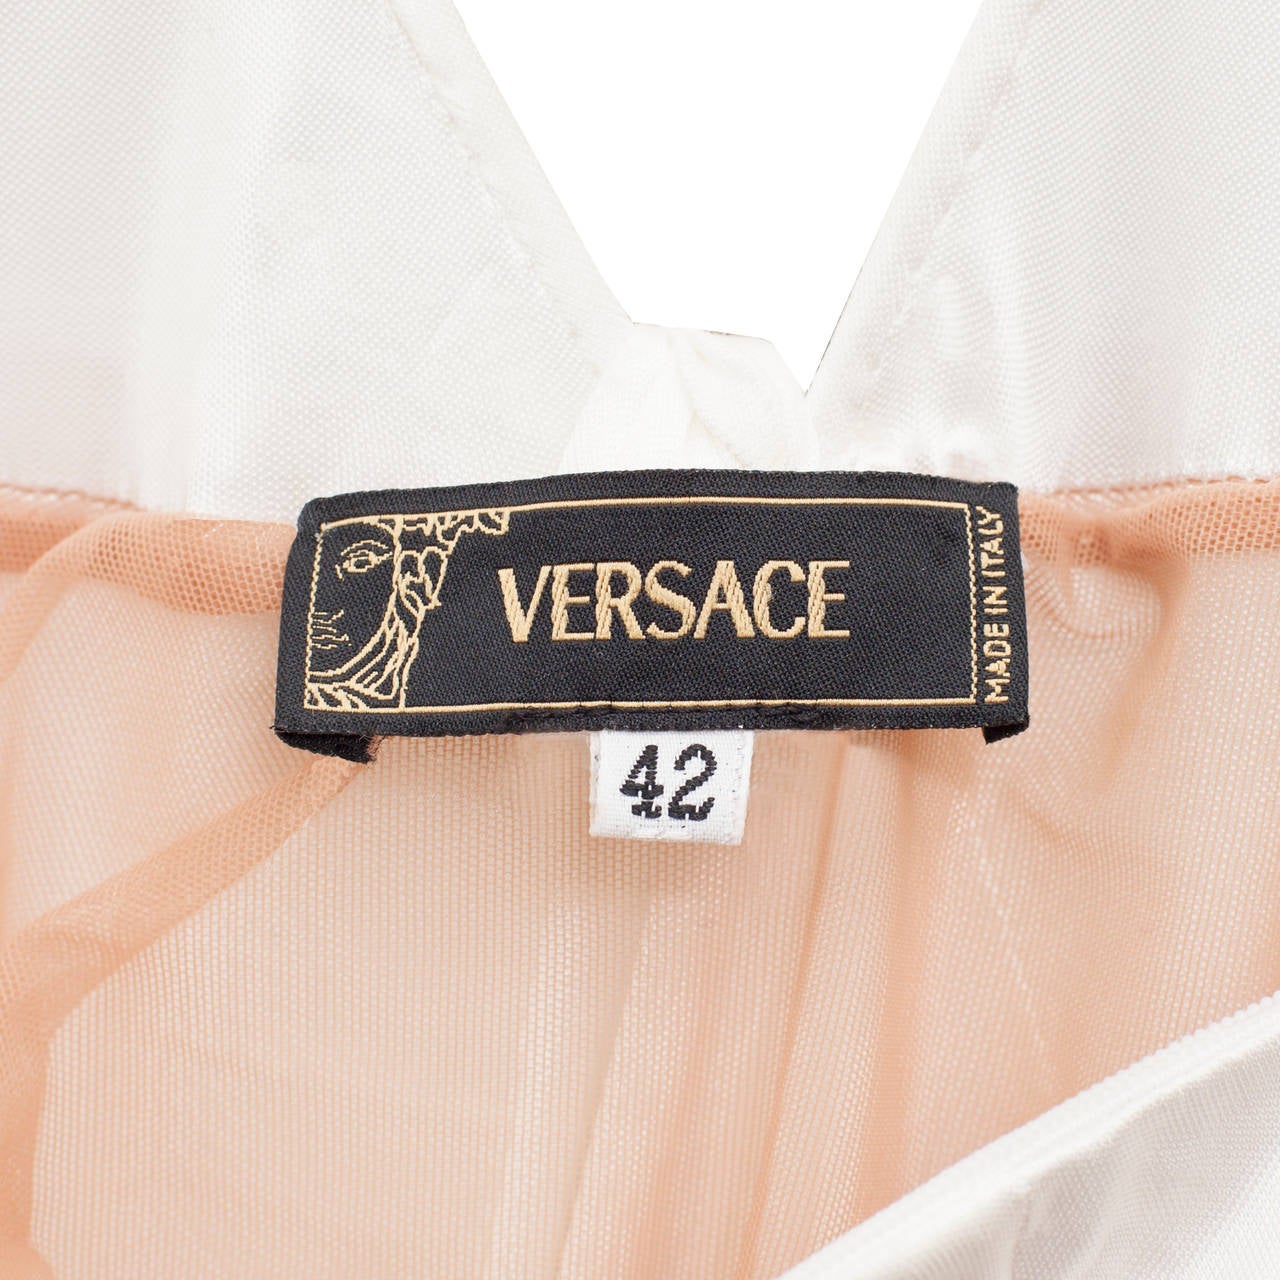 versace white gown